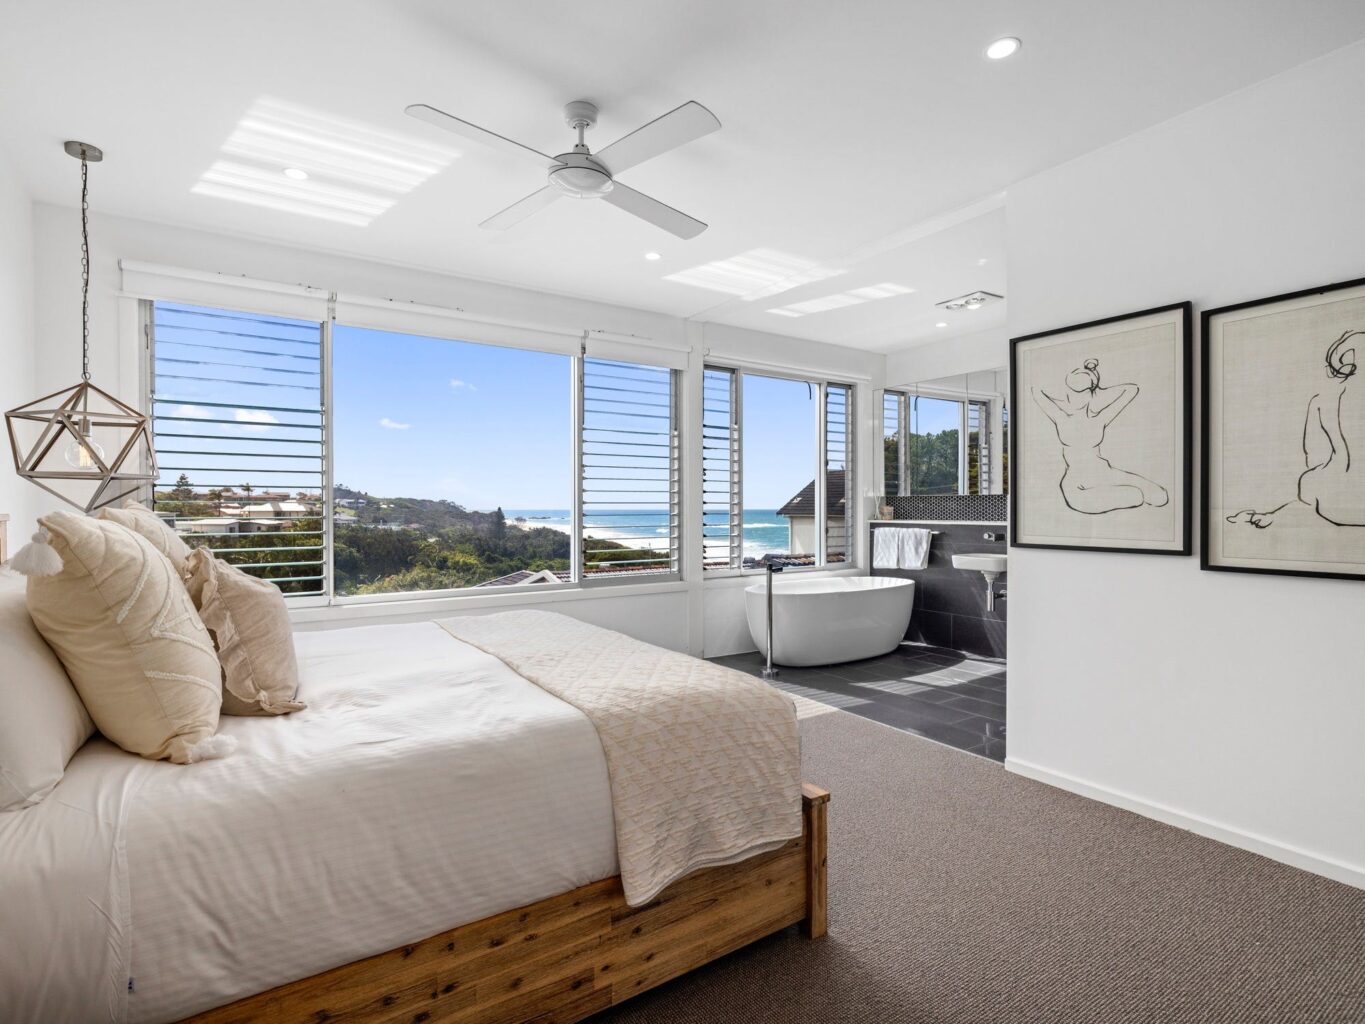 Main bedroom with ensuite and ocean views